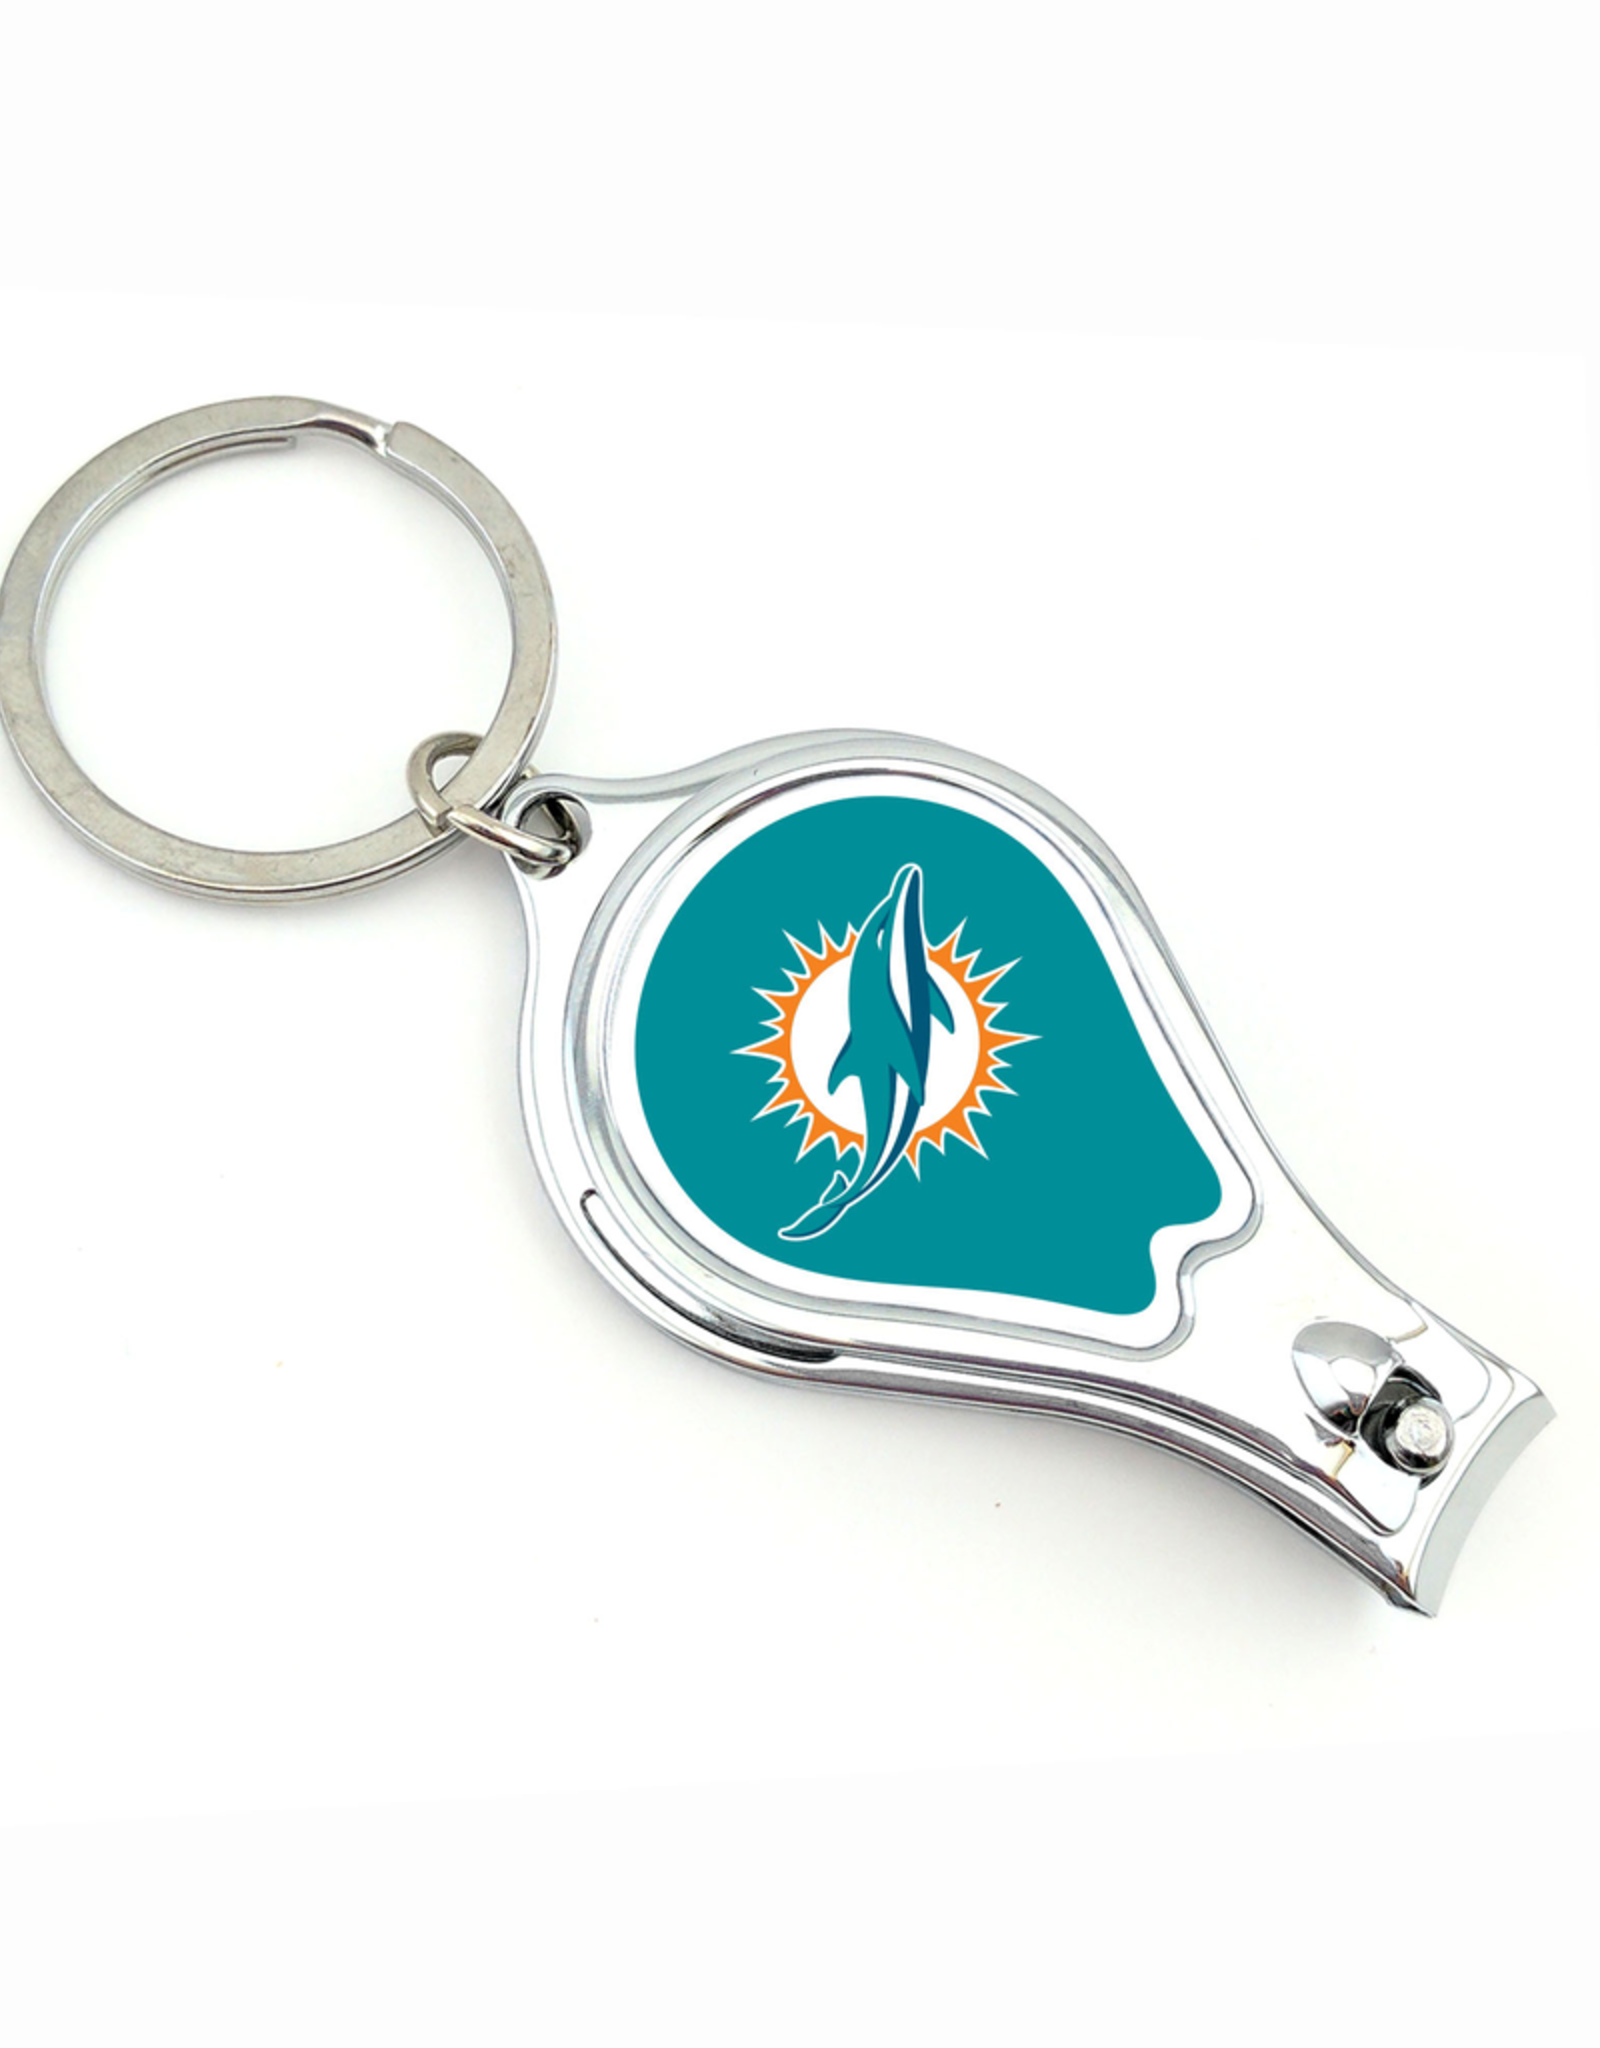 WORTHY PROMOTIONAL PRODUCTS Miami Dolphins Multi Function Key Ring